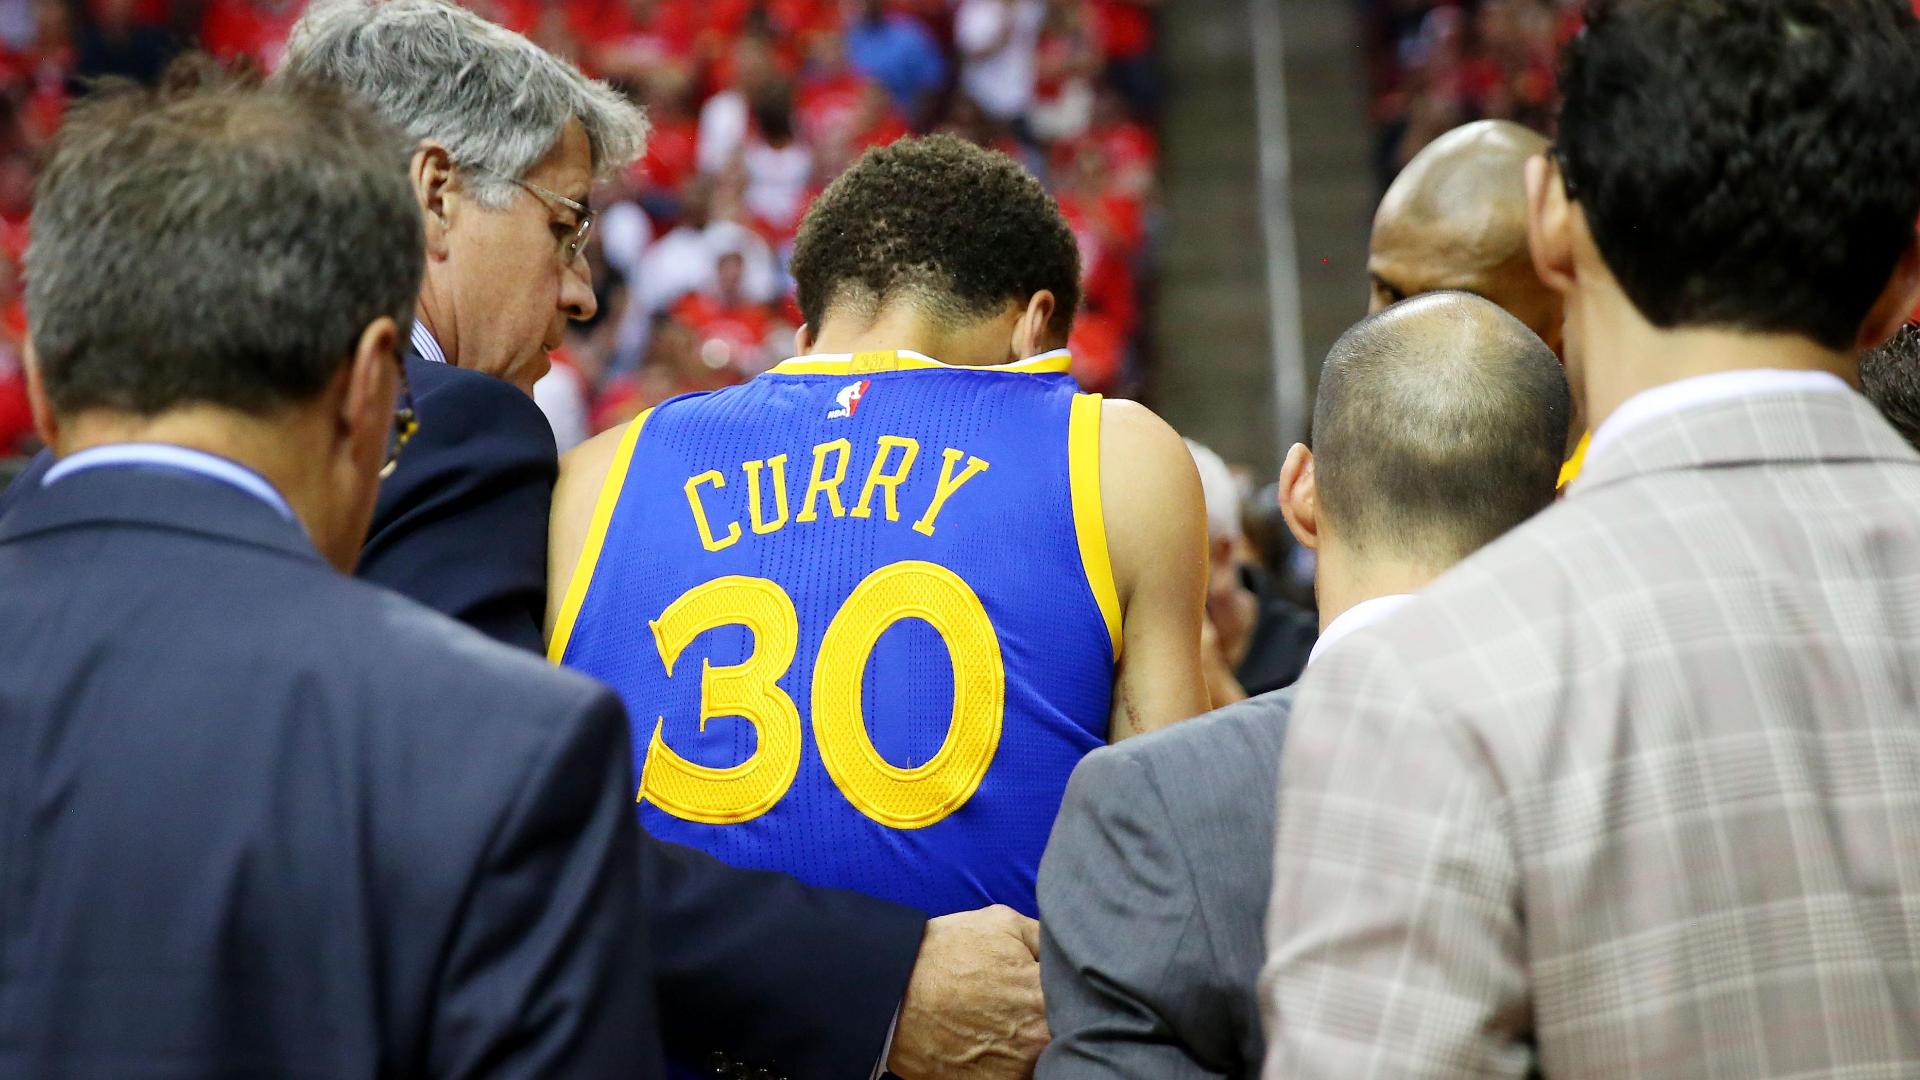 Stephen Curry returns to Game 4 loss after hard backward fall to court - ABC News